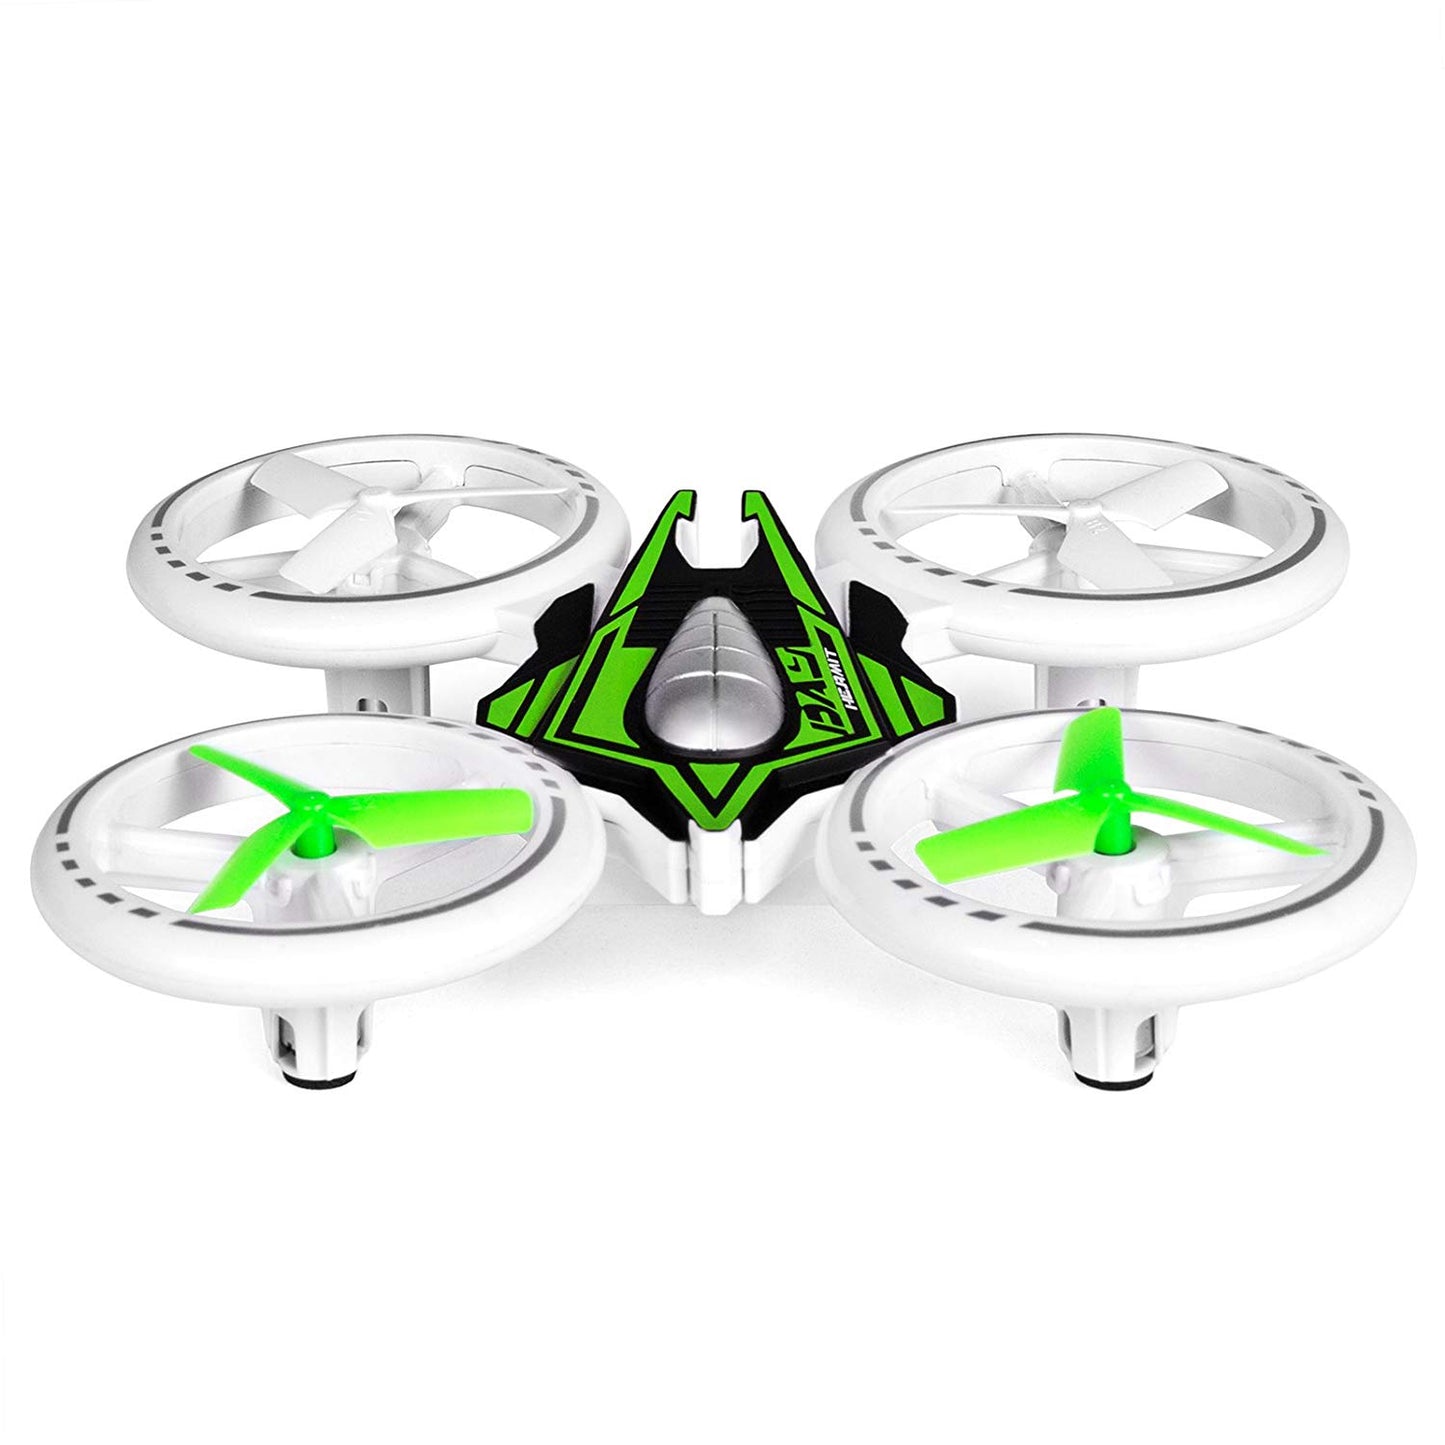 2.4GHz Remote Control Light-Up LED RC Drone Quadcopter UFO Star Ship w/ Altitude Hold -Multicolor